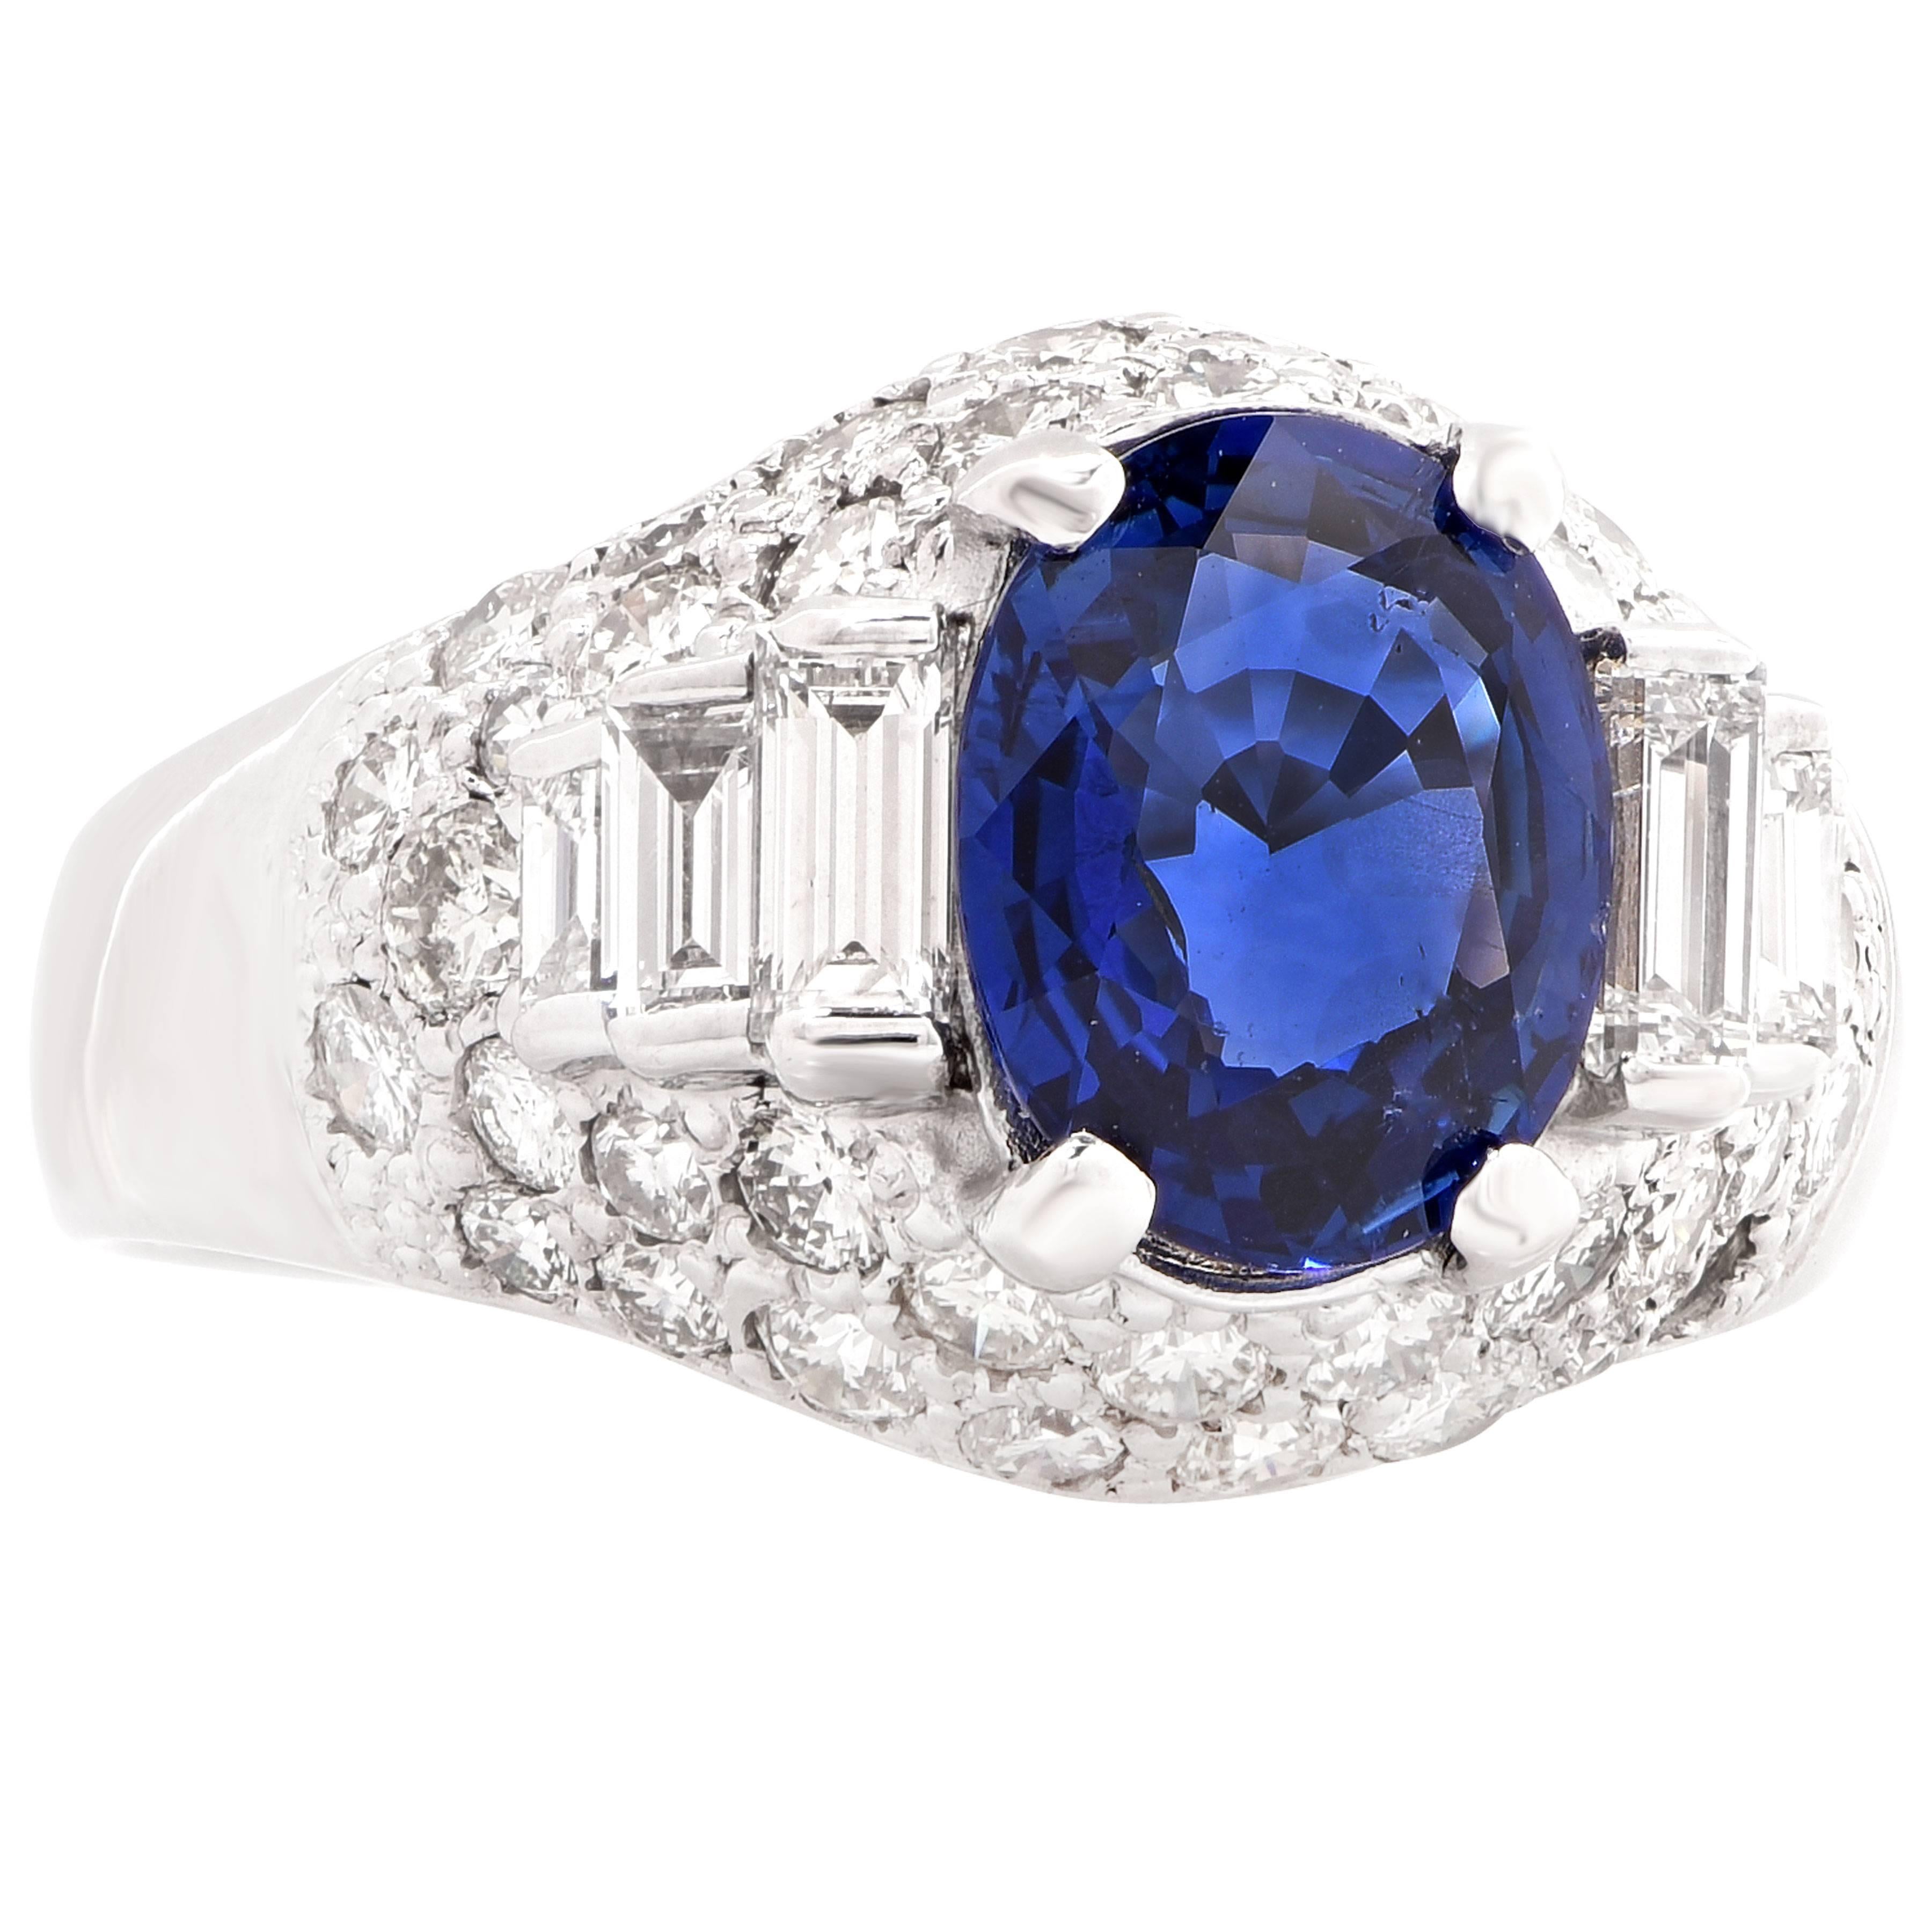 Women's 3.98 Carat Natural Blue Sapphire and Diamond Ring